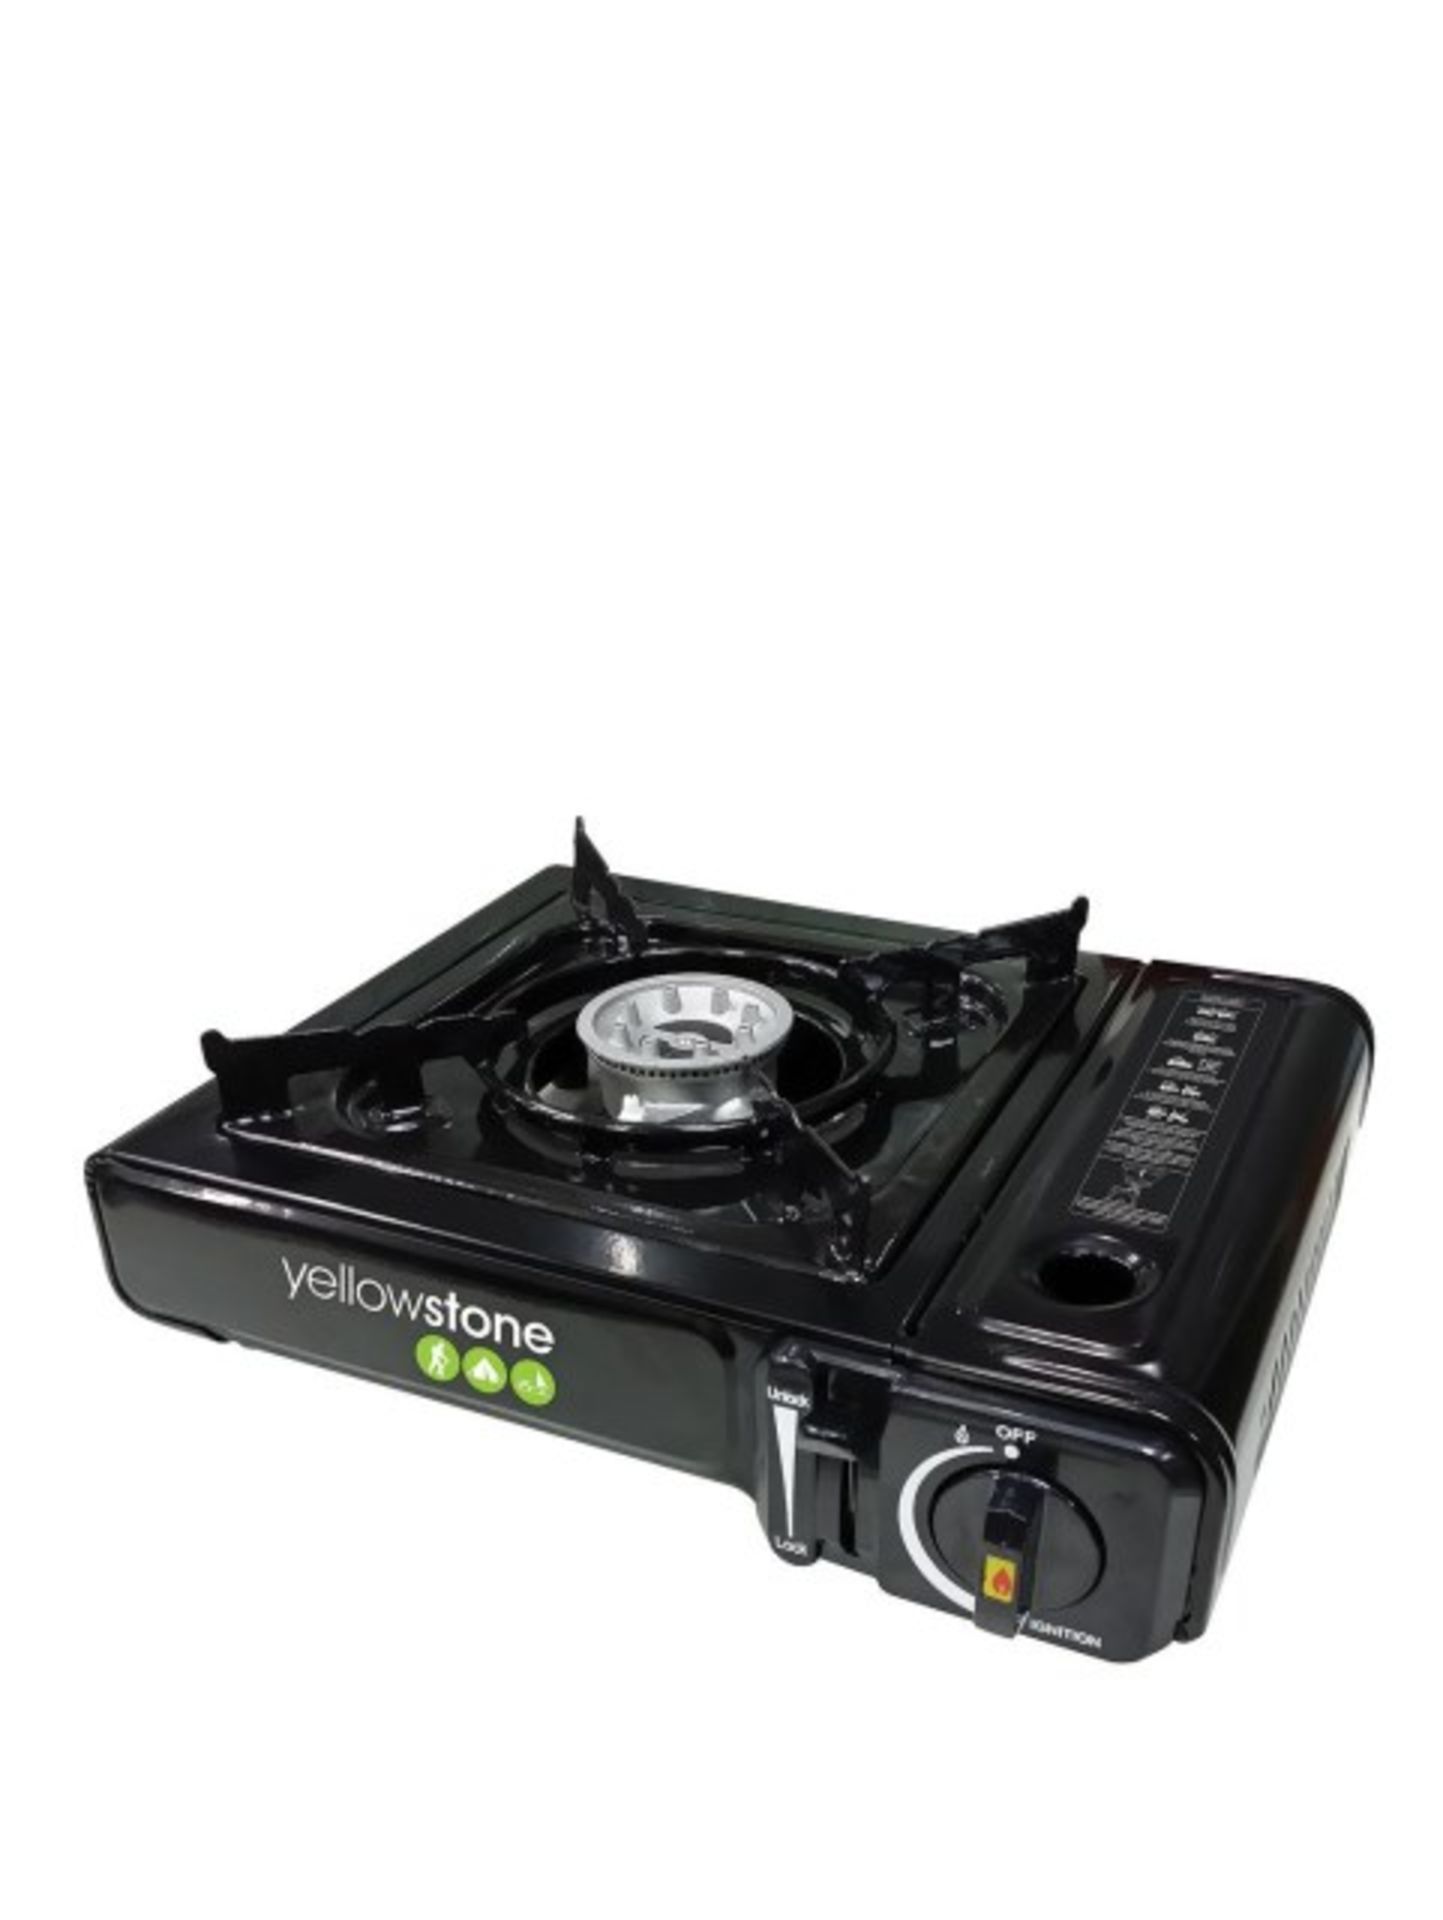 V *TRADE QTY* Brand New Portable Gas Stove In Briefcase X 10 YOUR BID PRICE TO BE MULTIPLIED BY TEN